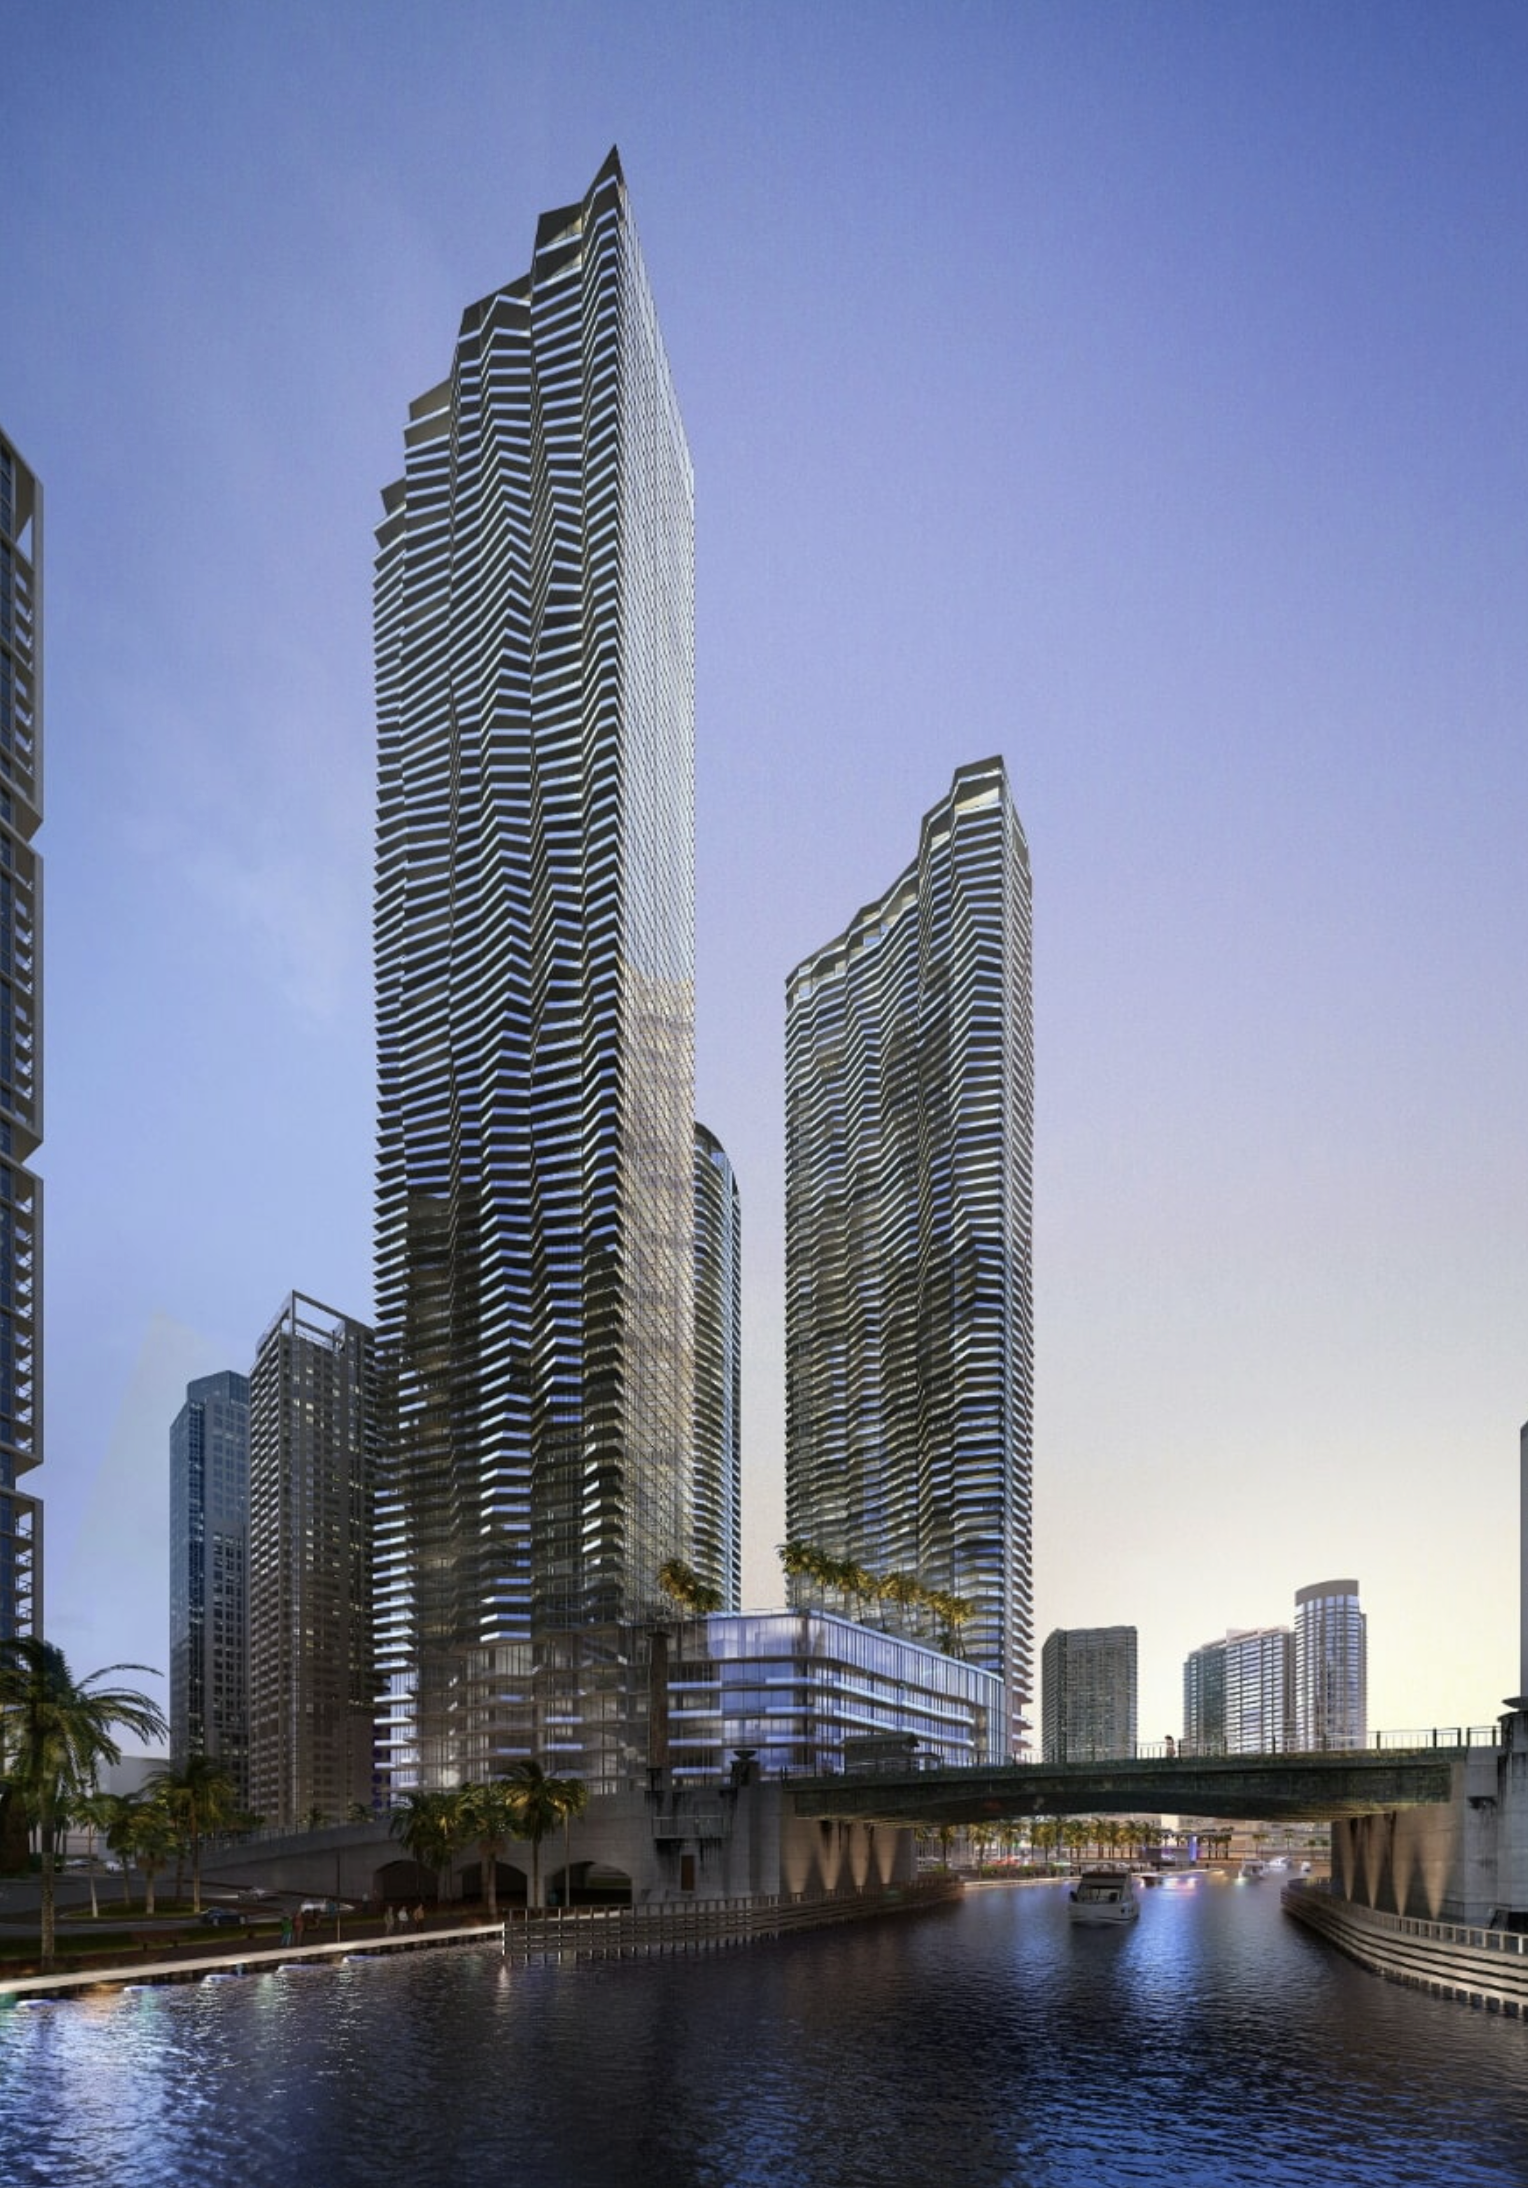 Rendering of 444 Brickell Avenue. Designed by Arquitectonica.